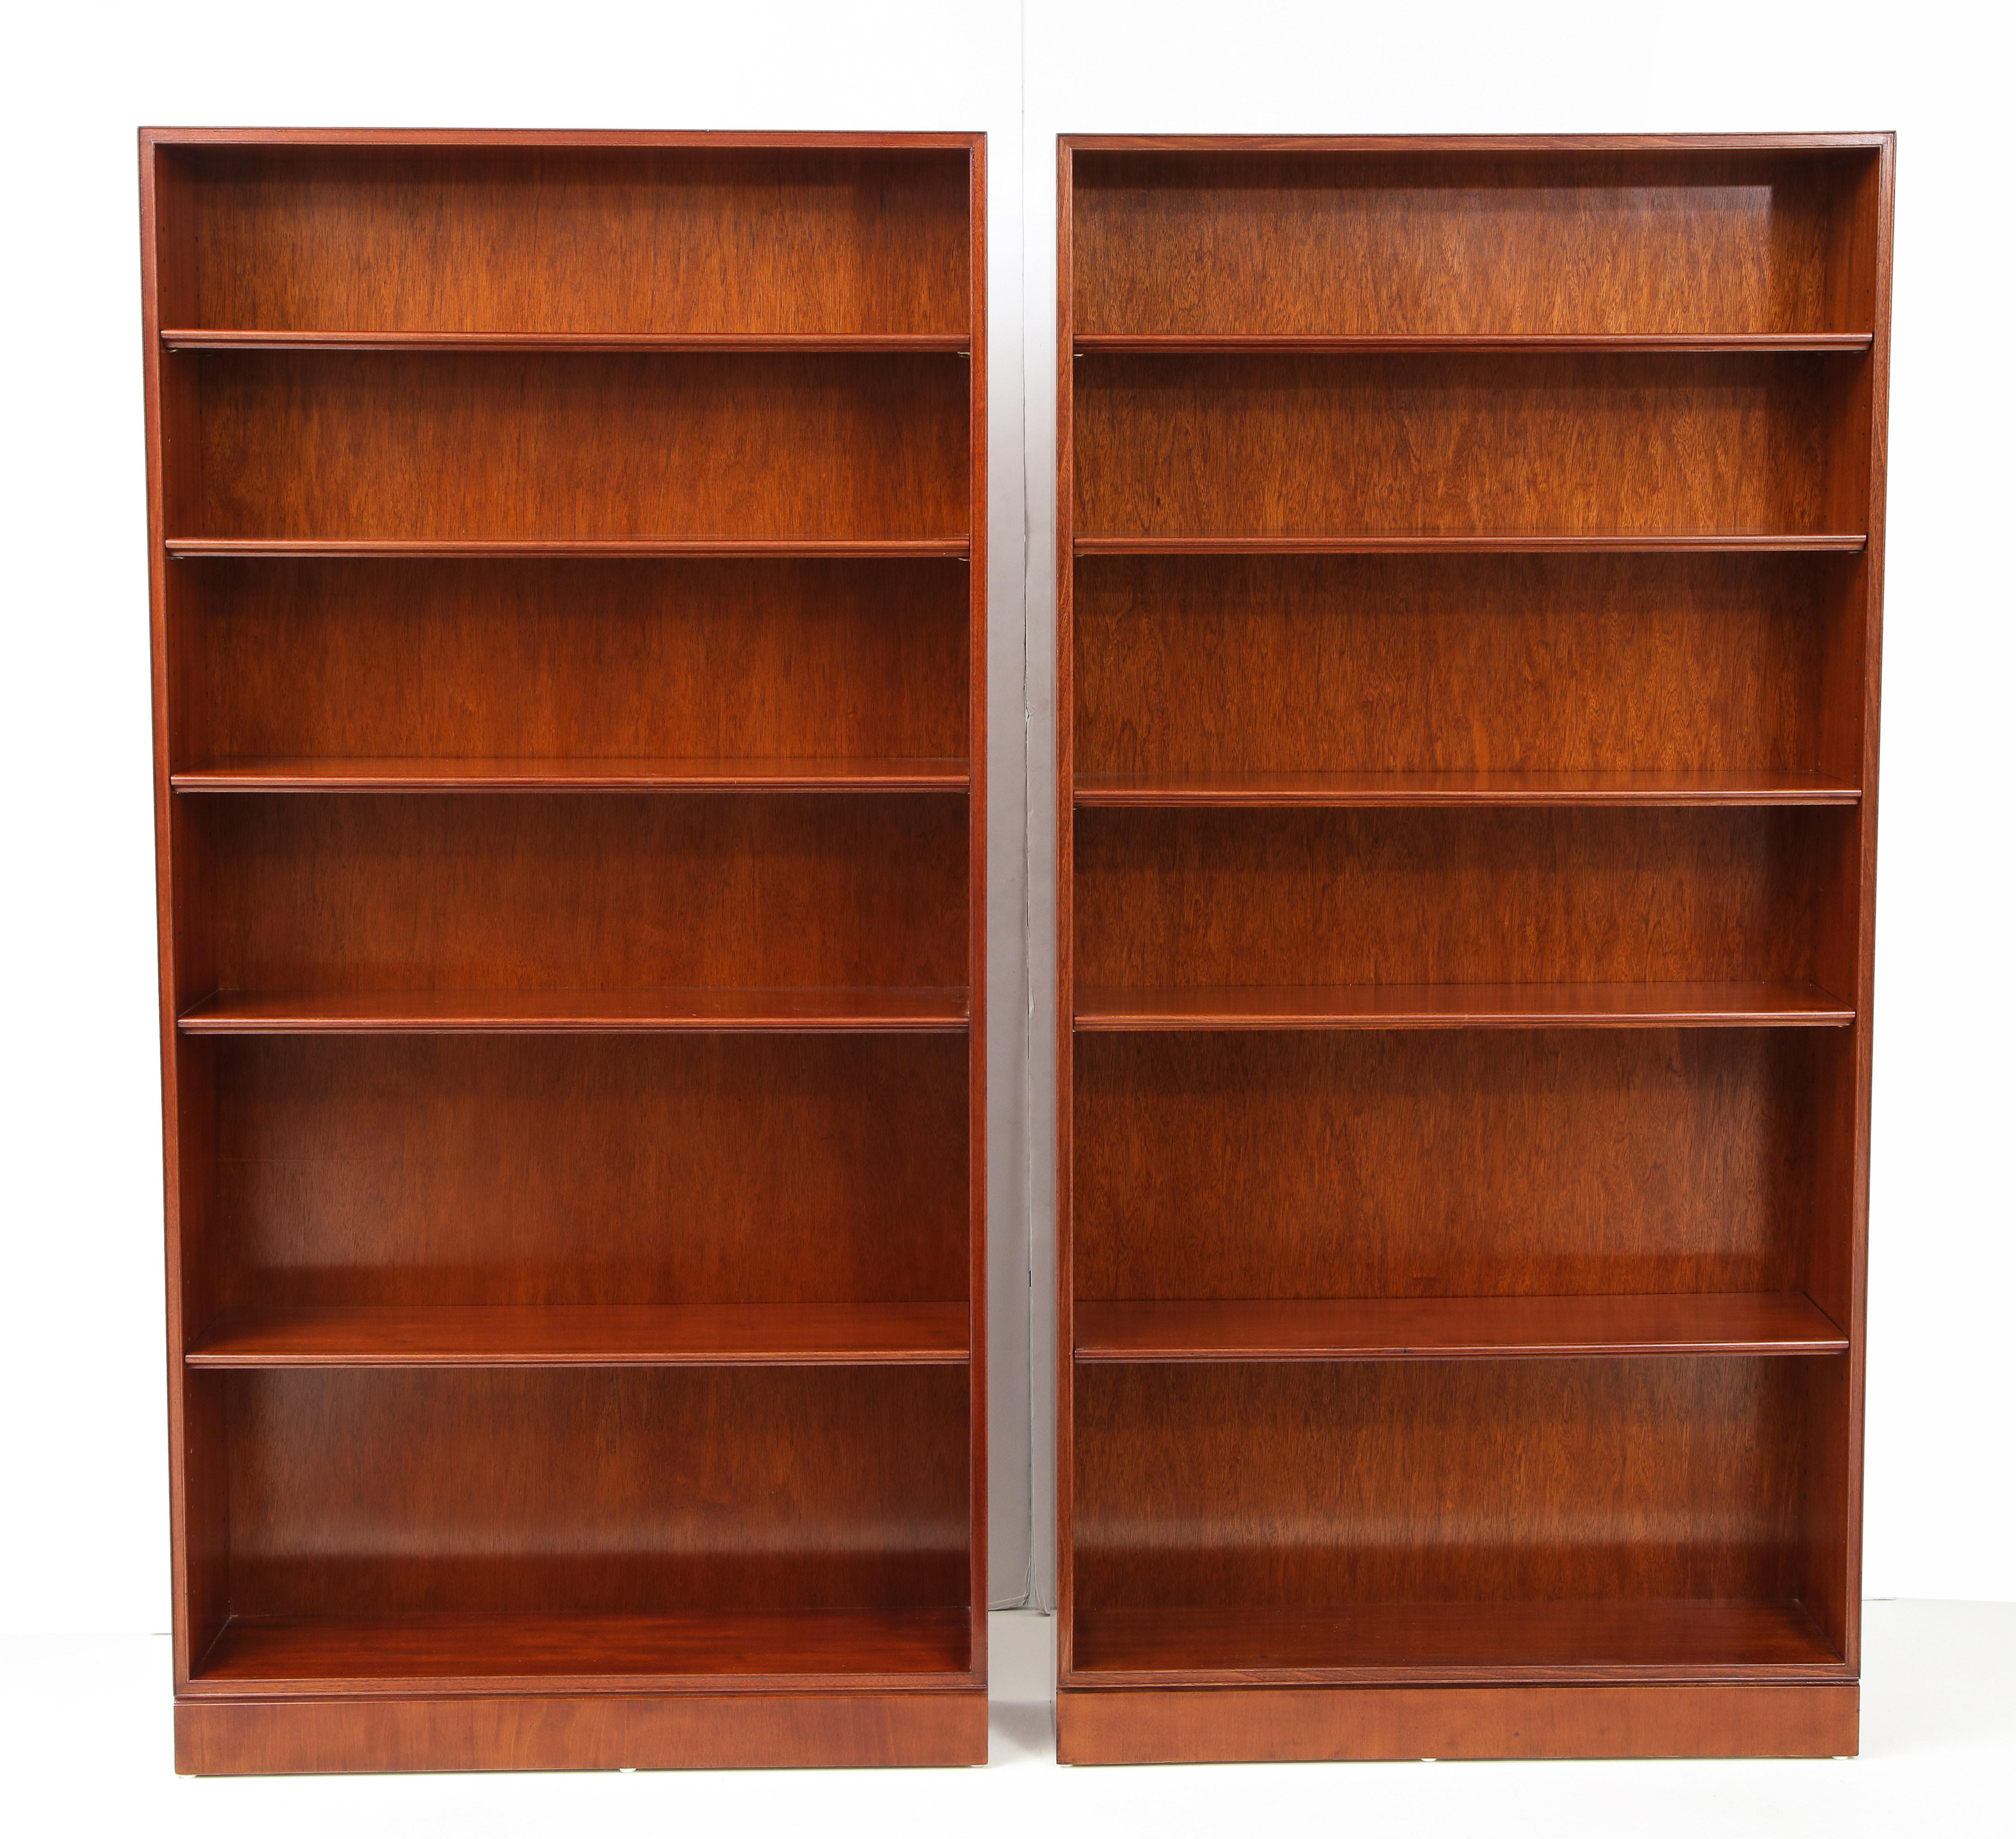 A pair of Danish mahogany tall open bookcases designed and produced by Frits Henningsen, circa 1940s, of clean rectangular form with a plinth base and each with five adjustable shelves with a molded front edge.